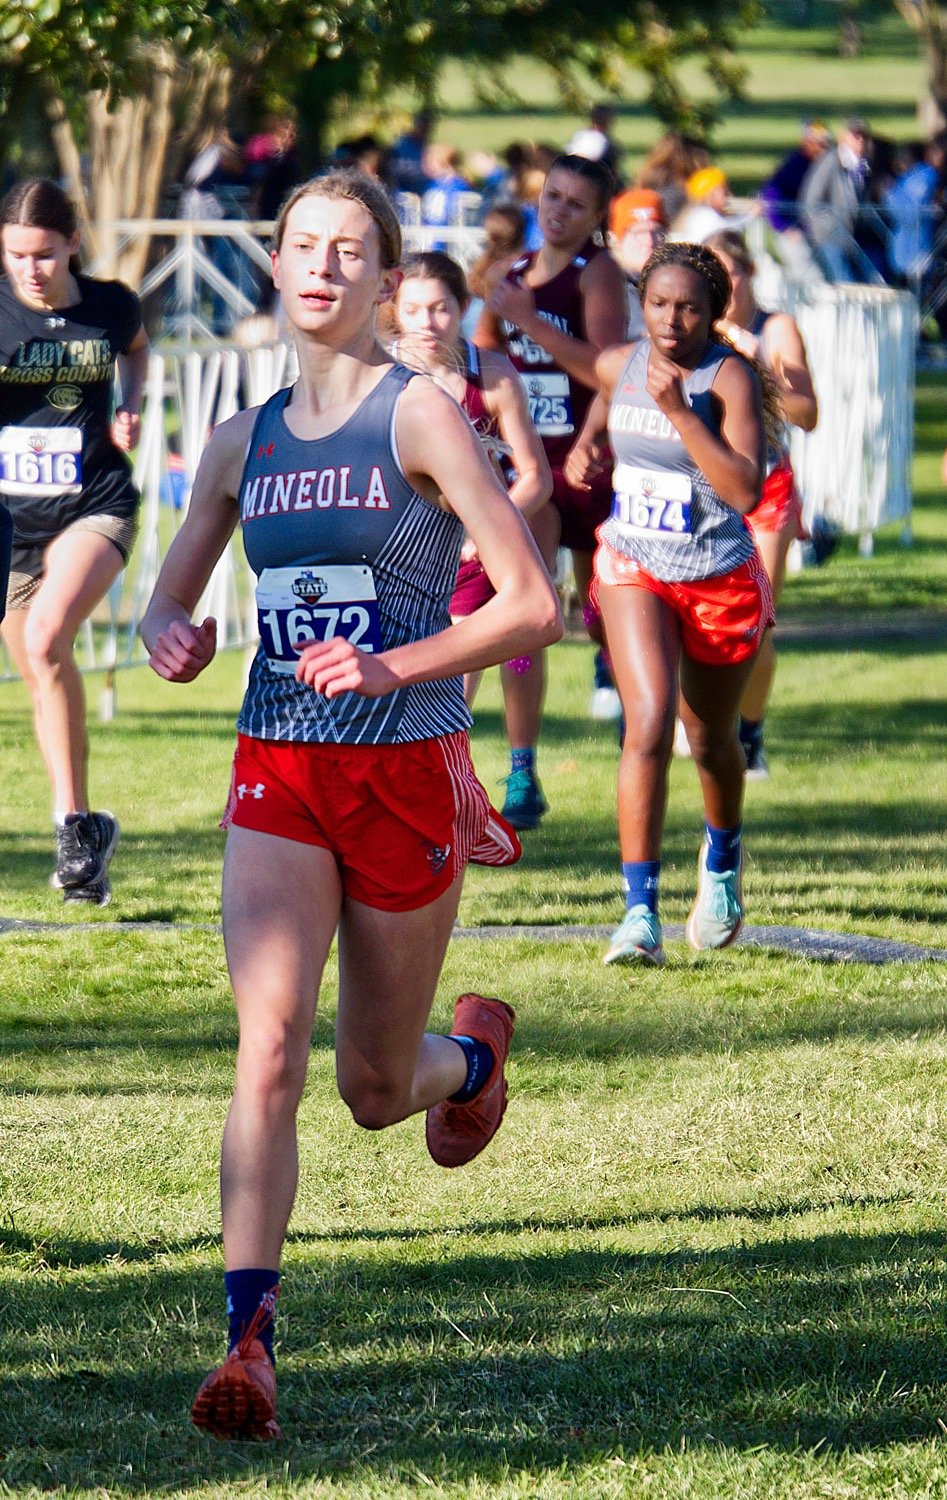 Olivia Hughes ran fastest for Mineola, followed closely here by Shylah Kratzmeyer and Hannah Zoch. [View more of the competition.]